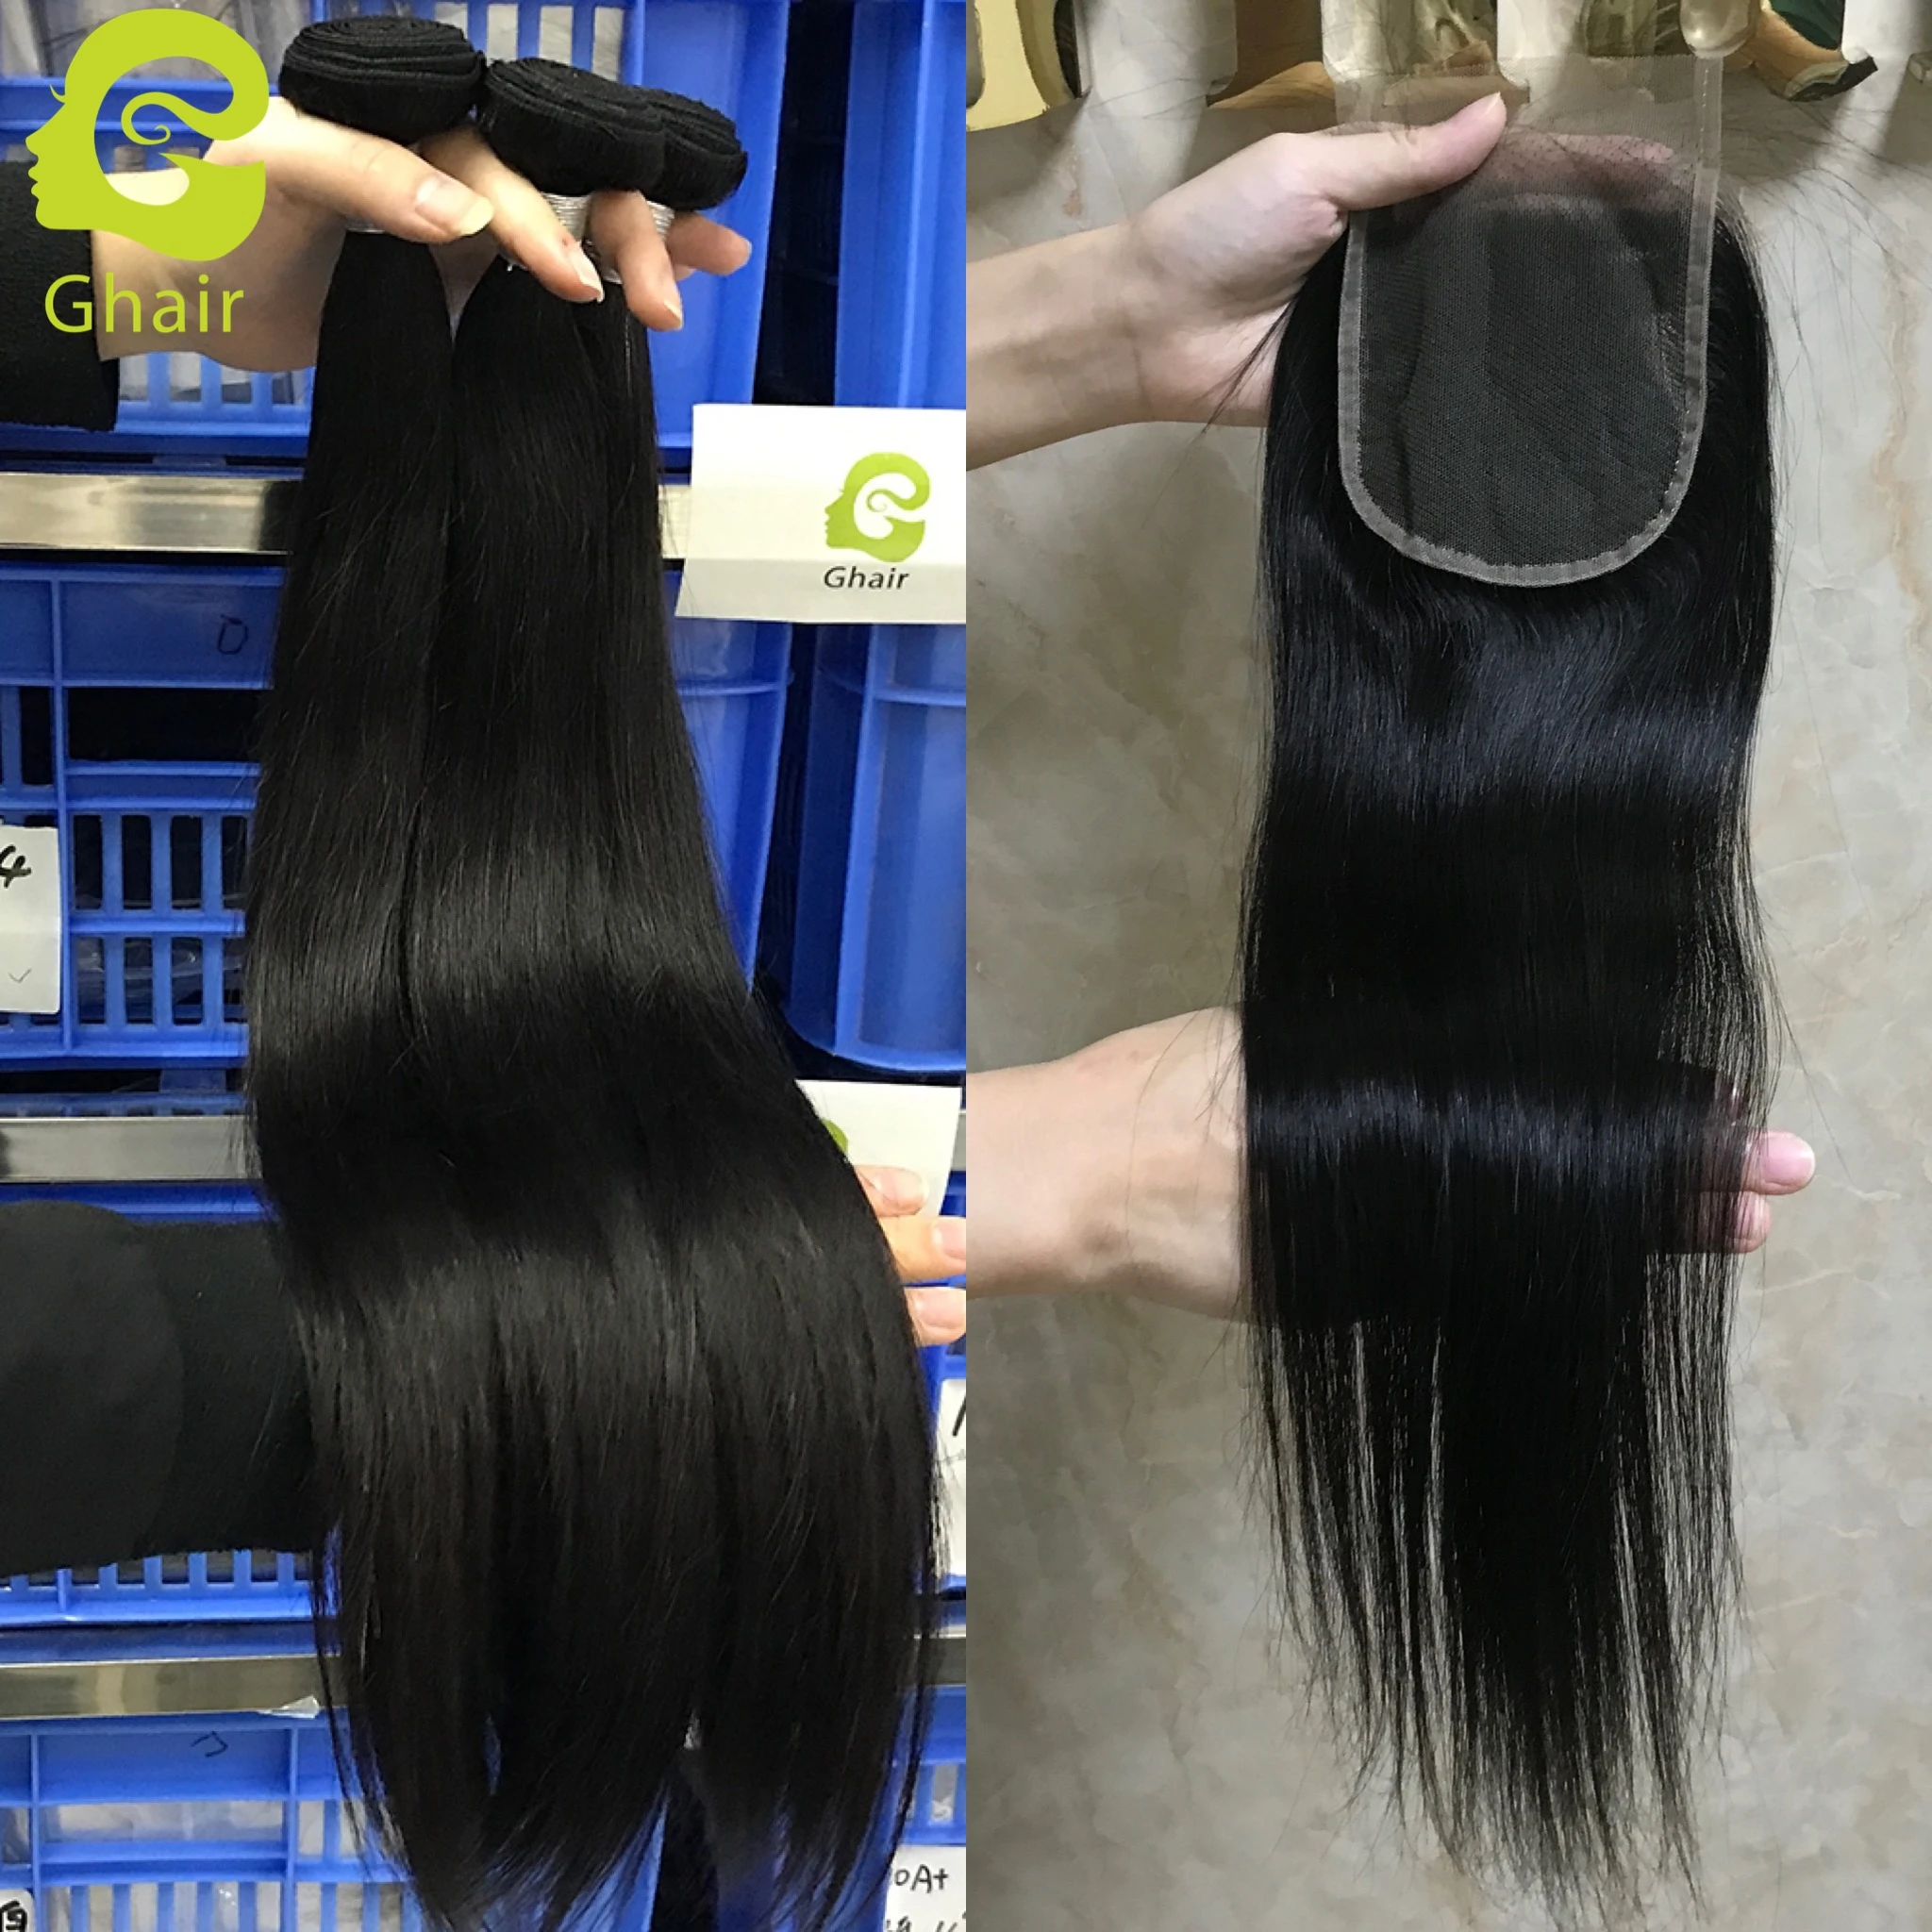 Wholesale raw virgin hair vendors hand tied weft hair extension cuticle aligned Indian raw human hair with closure